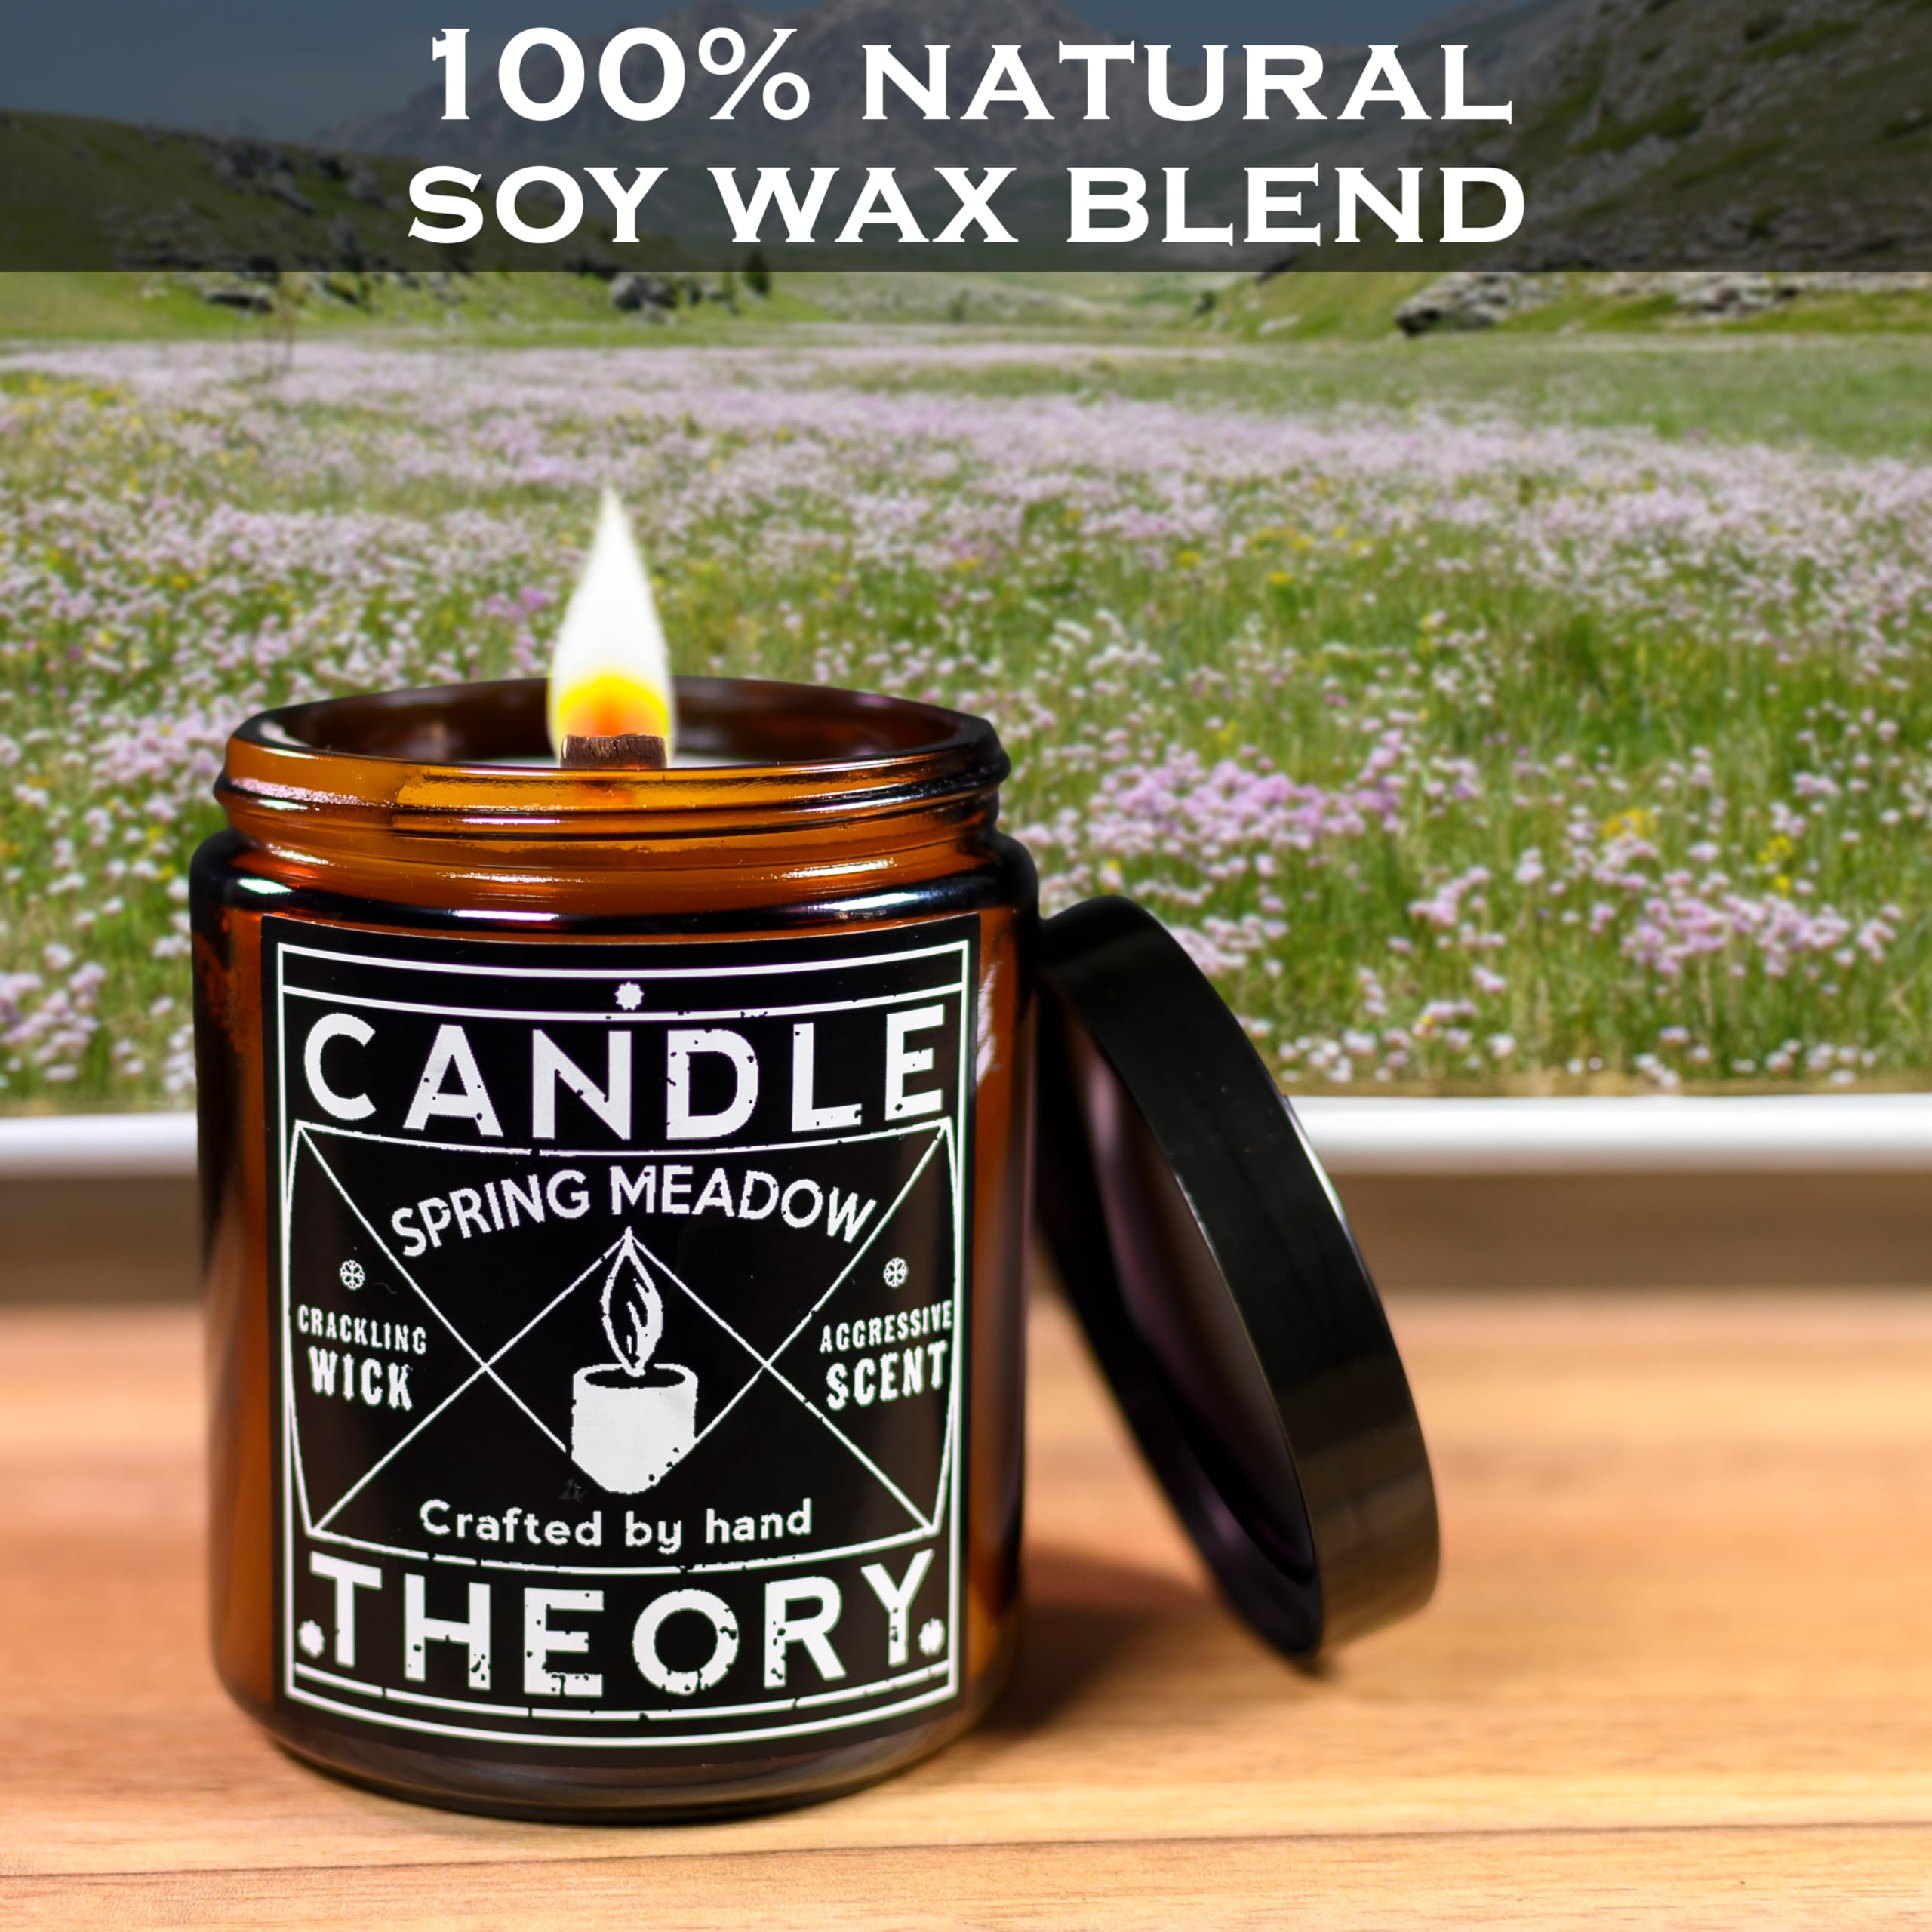 Candle Theory Scented Candles - in set of 3 in 4 oz each or in singles